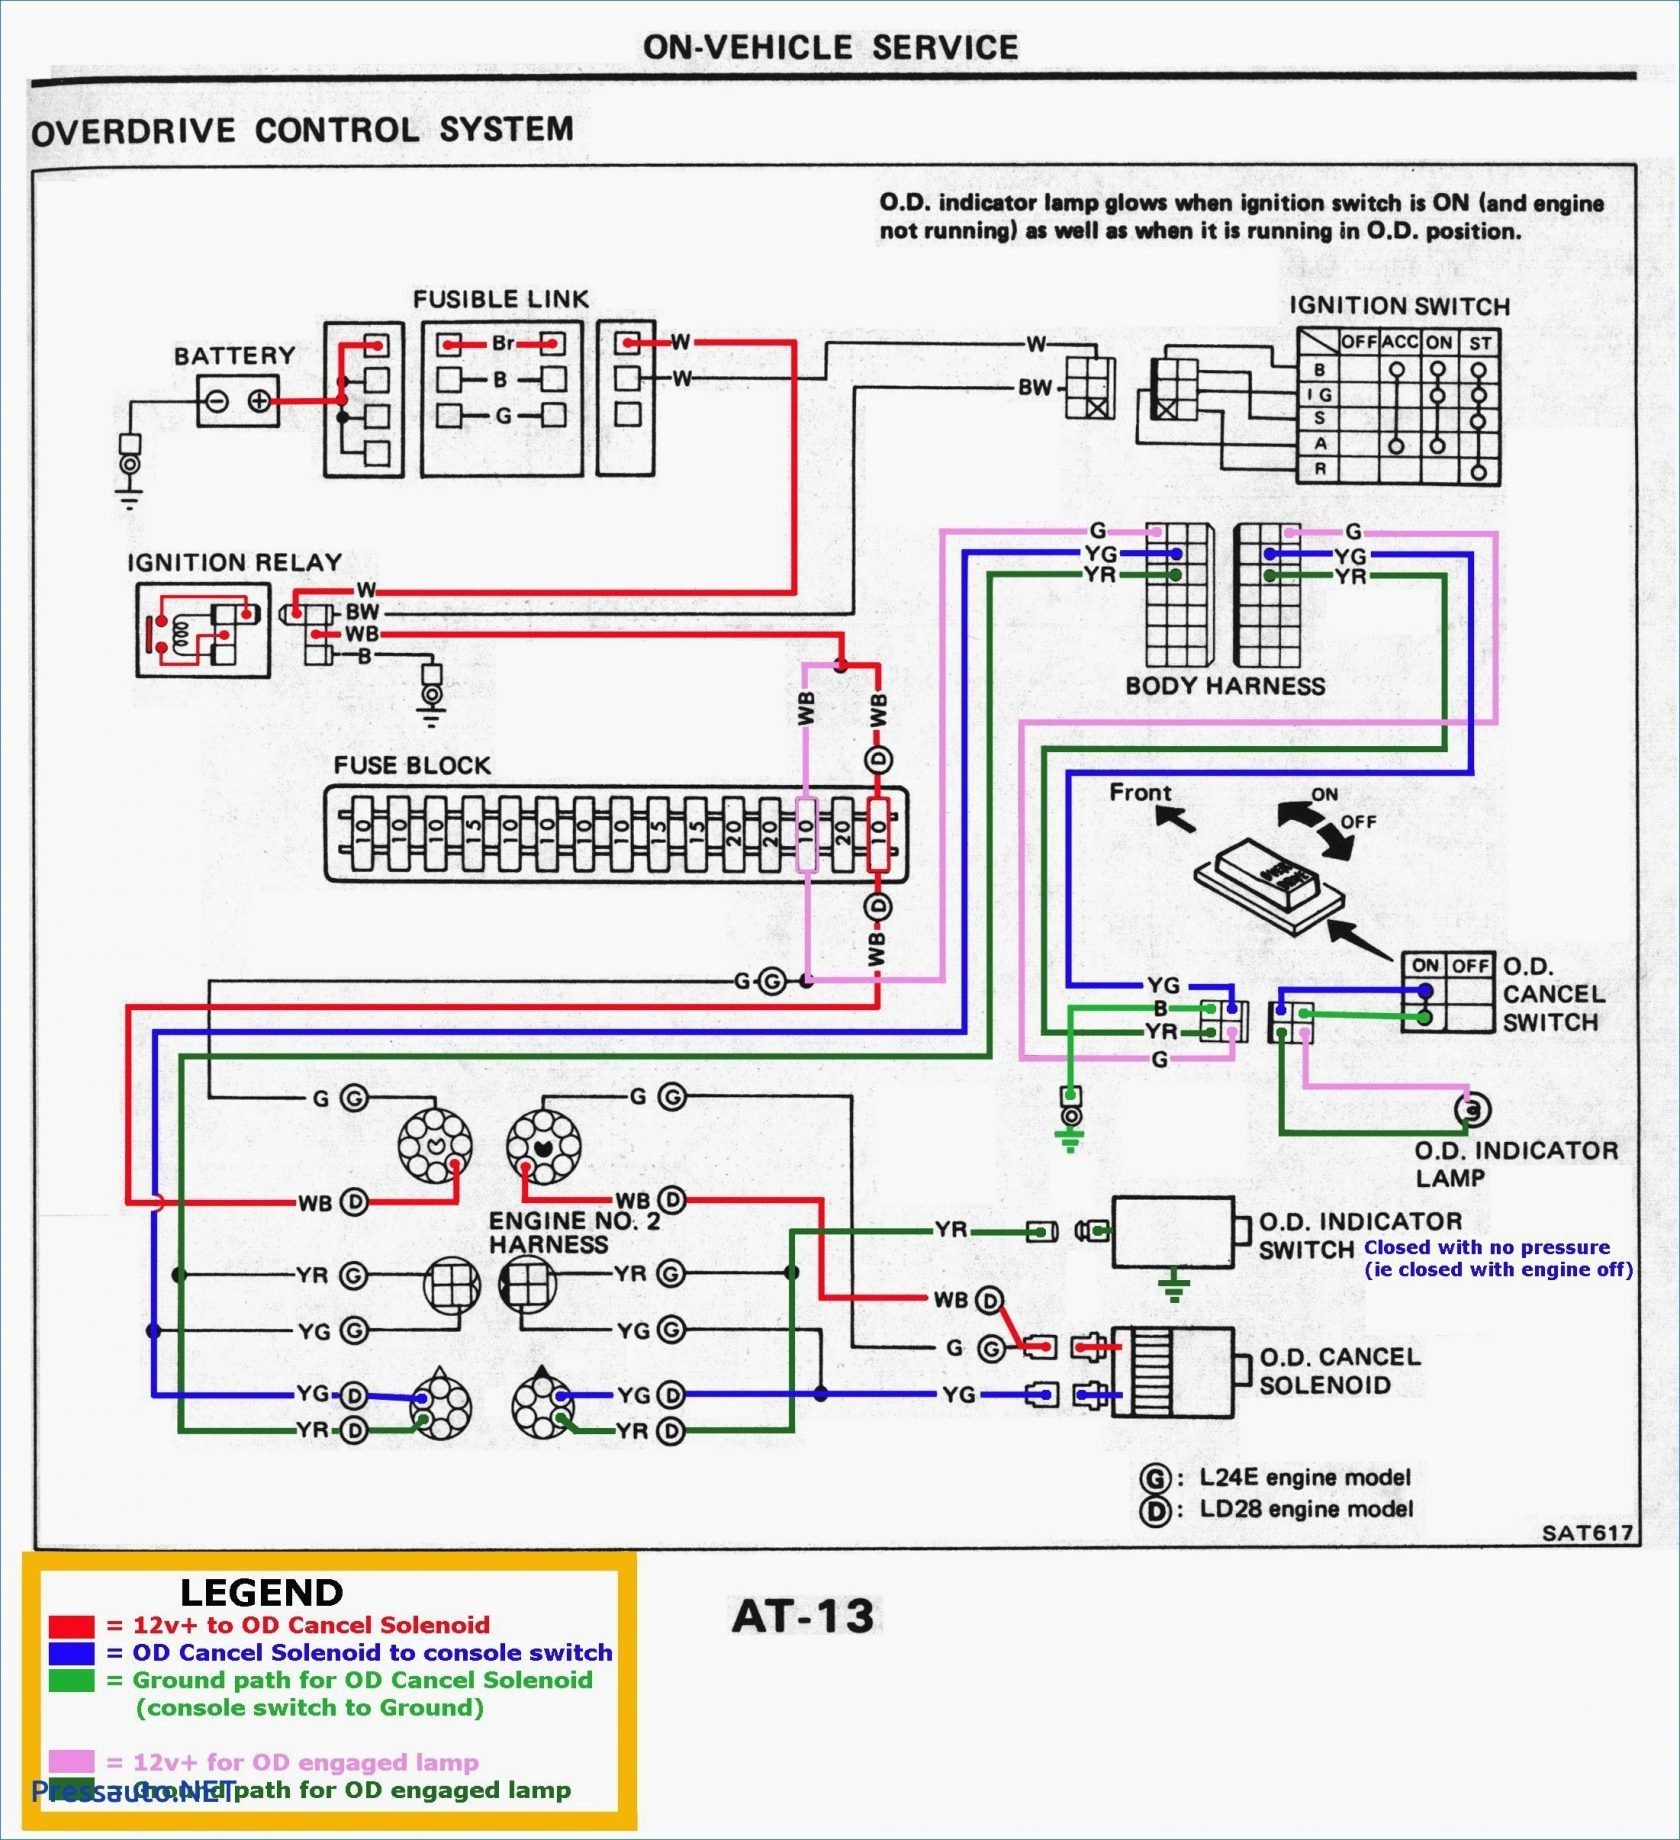 Wiring Diagram On ford 650 Echlin solenoid Switch Wiring Diagram Of Wiring Diagram On ford 650